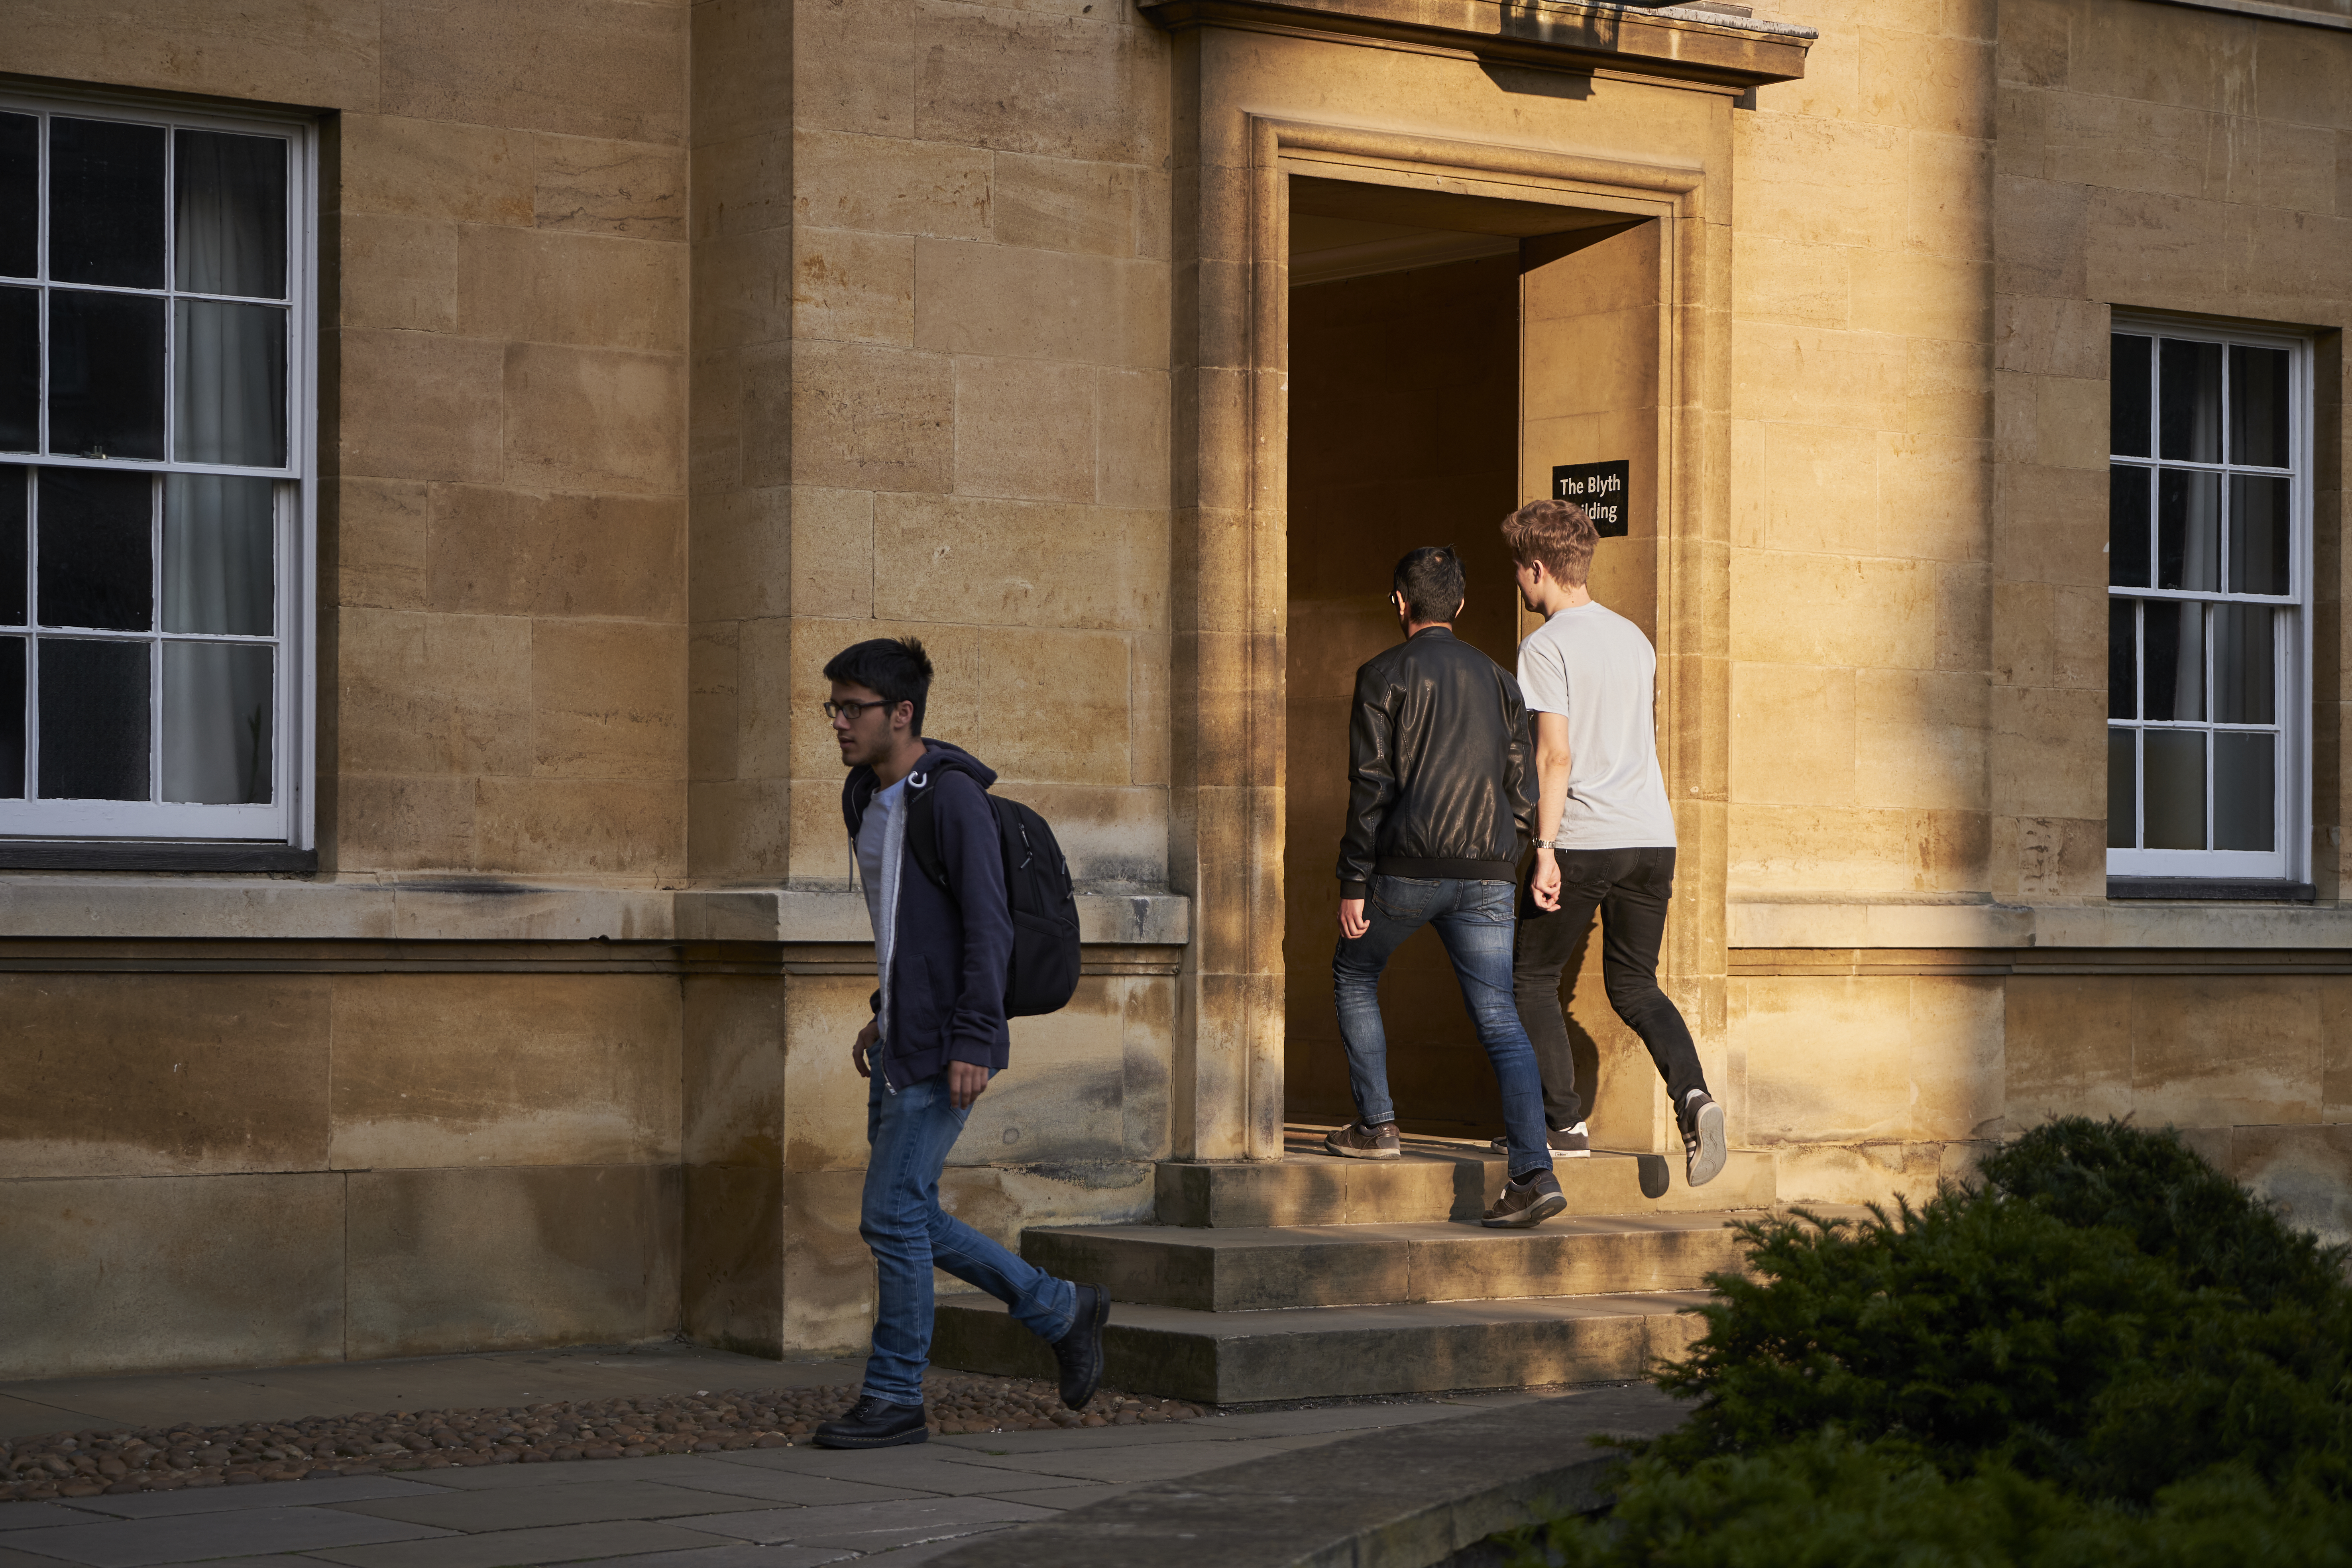 Student entering the Blyth Building